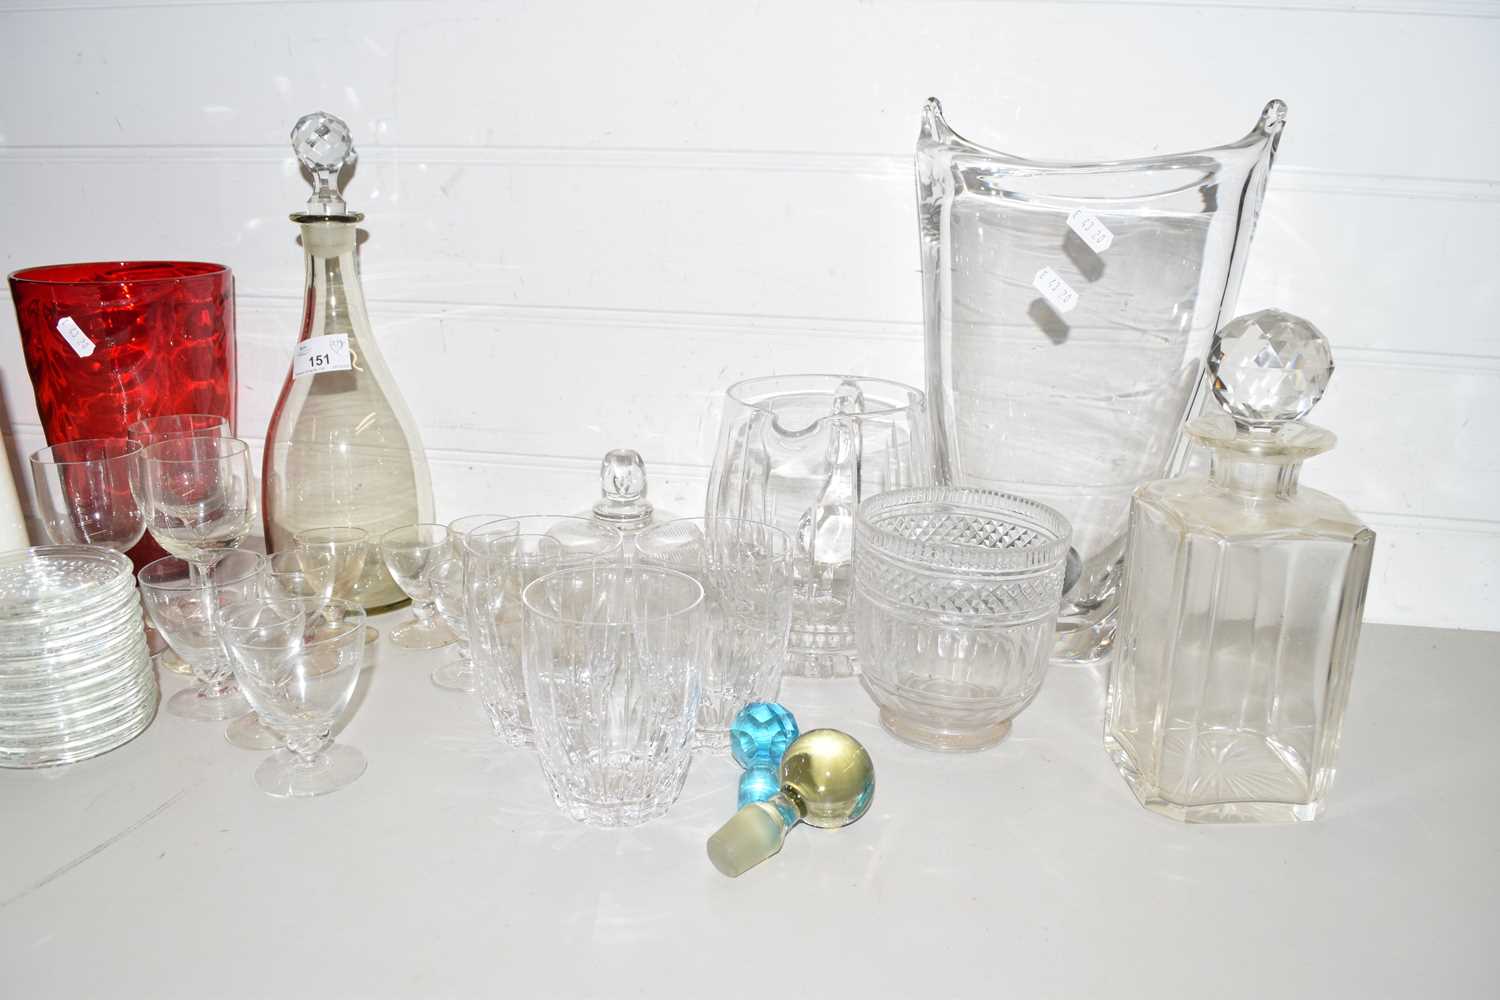 GROUP OF GLASS WARES INCLUDING A DECANTER WITH FACETED STOPPER, GLASS DECANTER, POTTERY JUG AND - Image 2 of 2